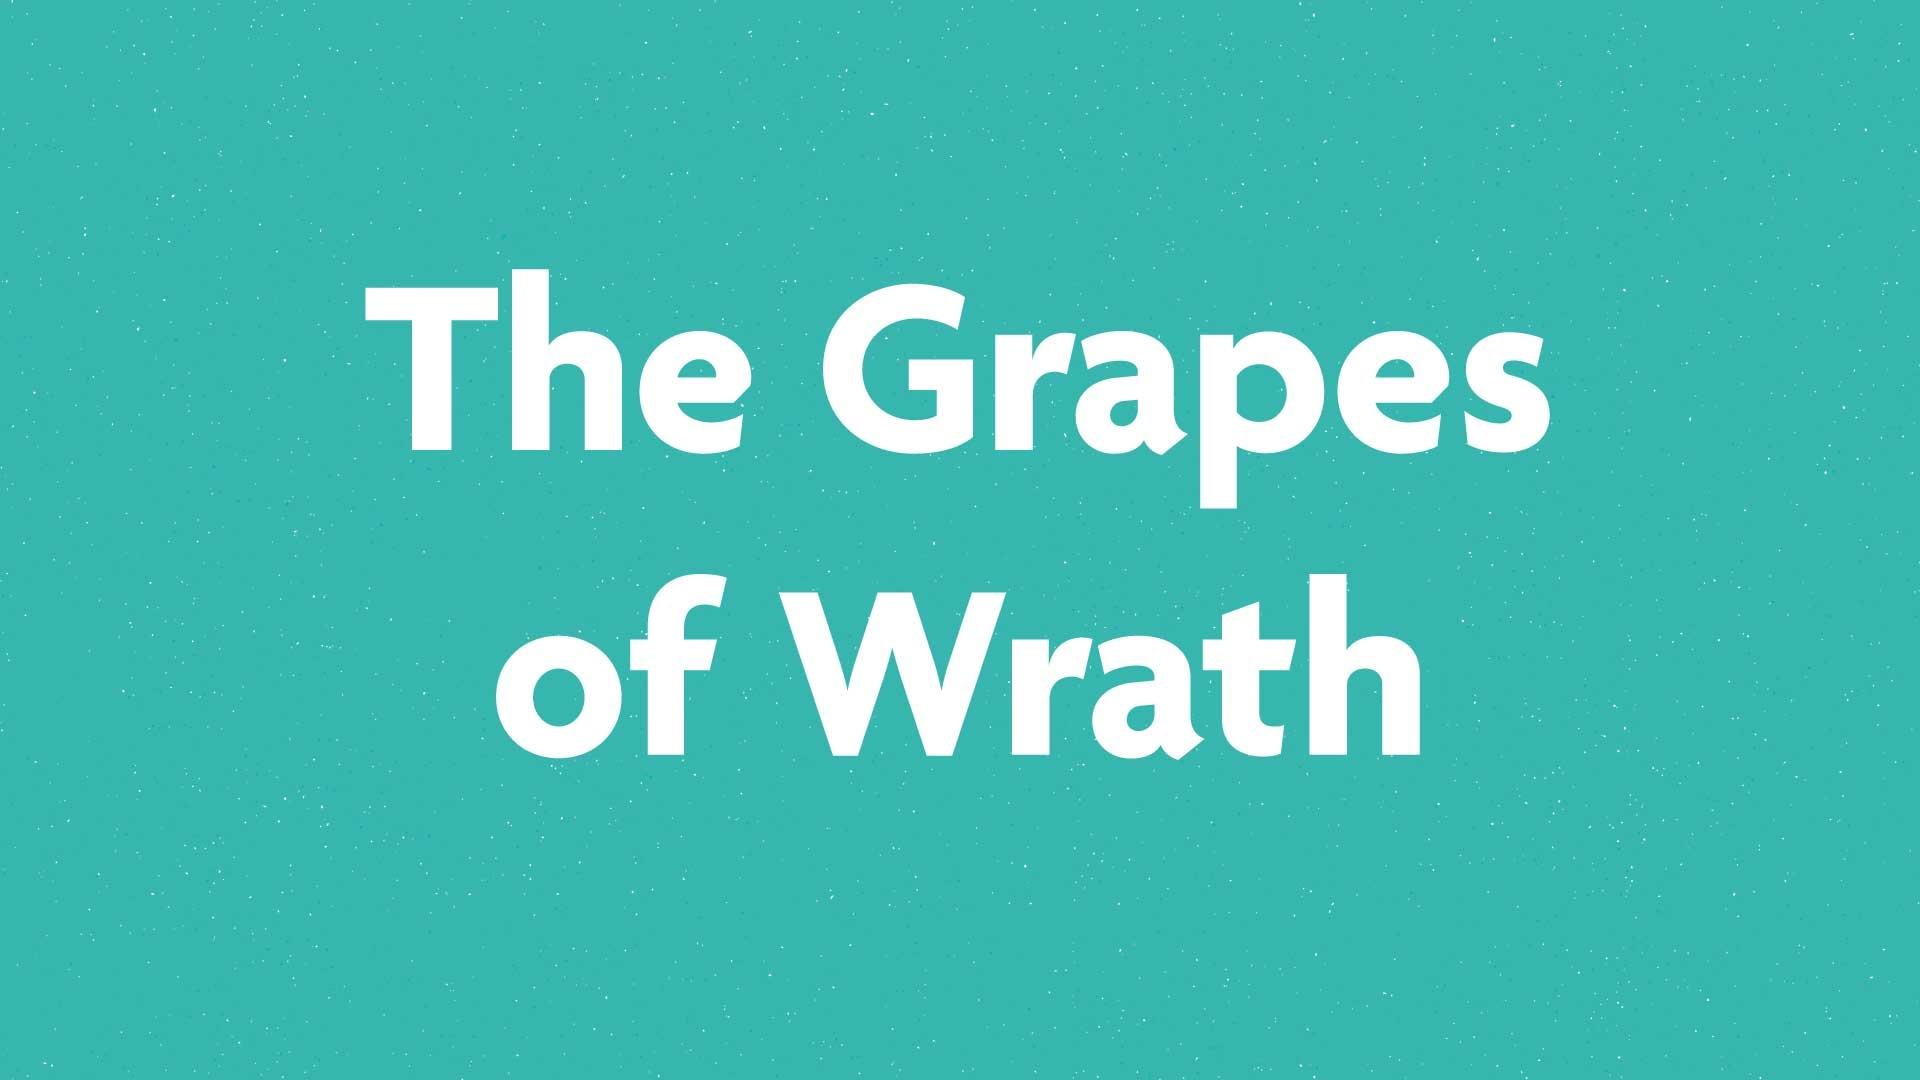 The Grapes of Wrath book submission card on a green background.